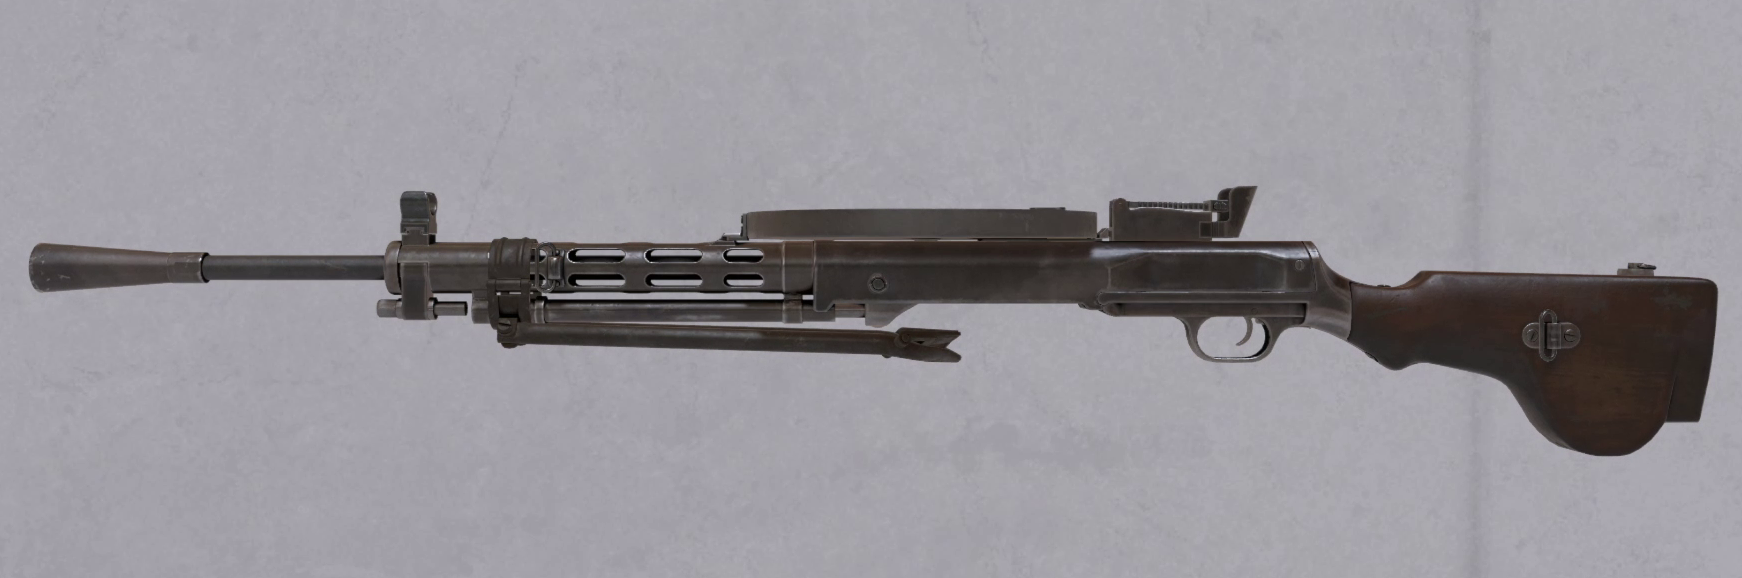 Lee-Enfield Jungle Carbine, H3VR Wikia